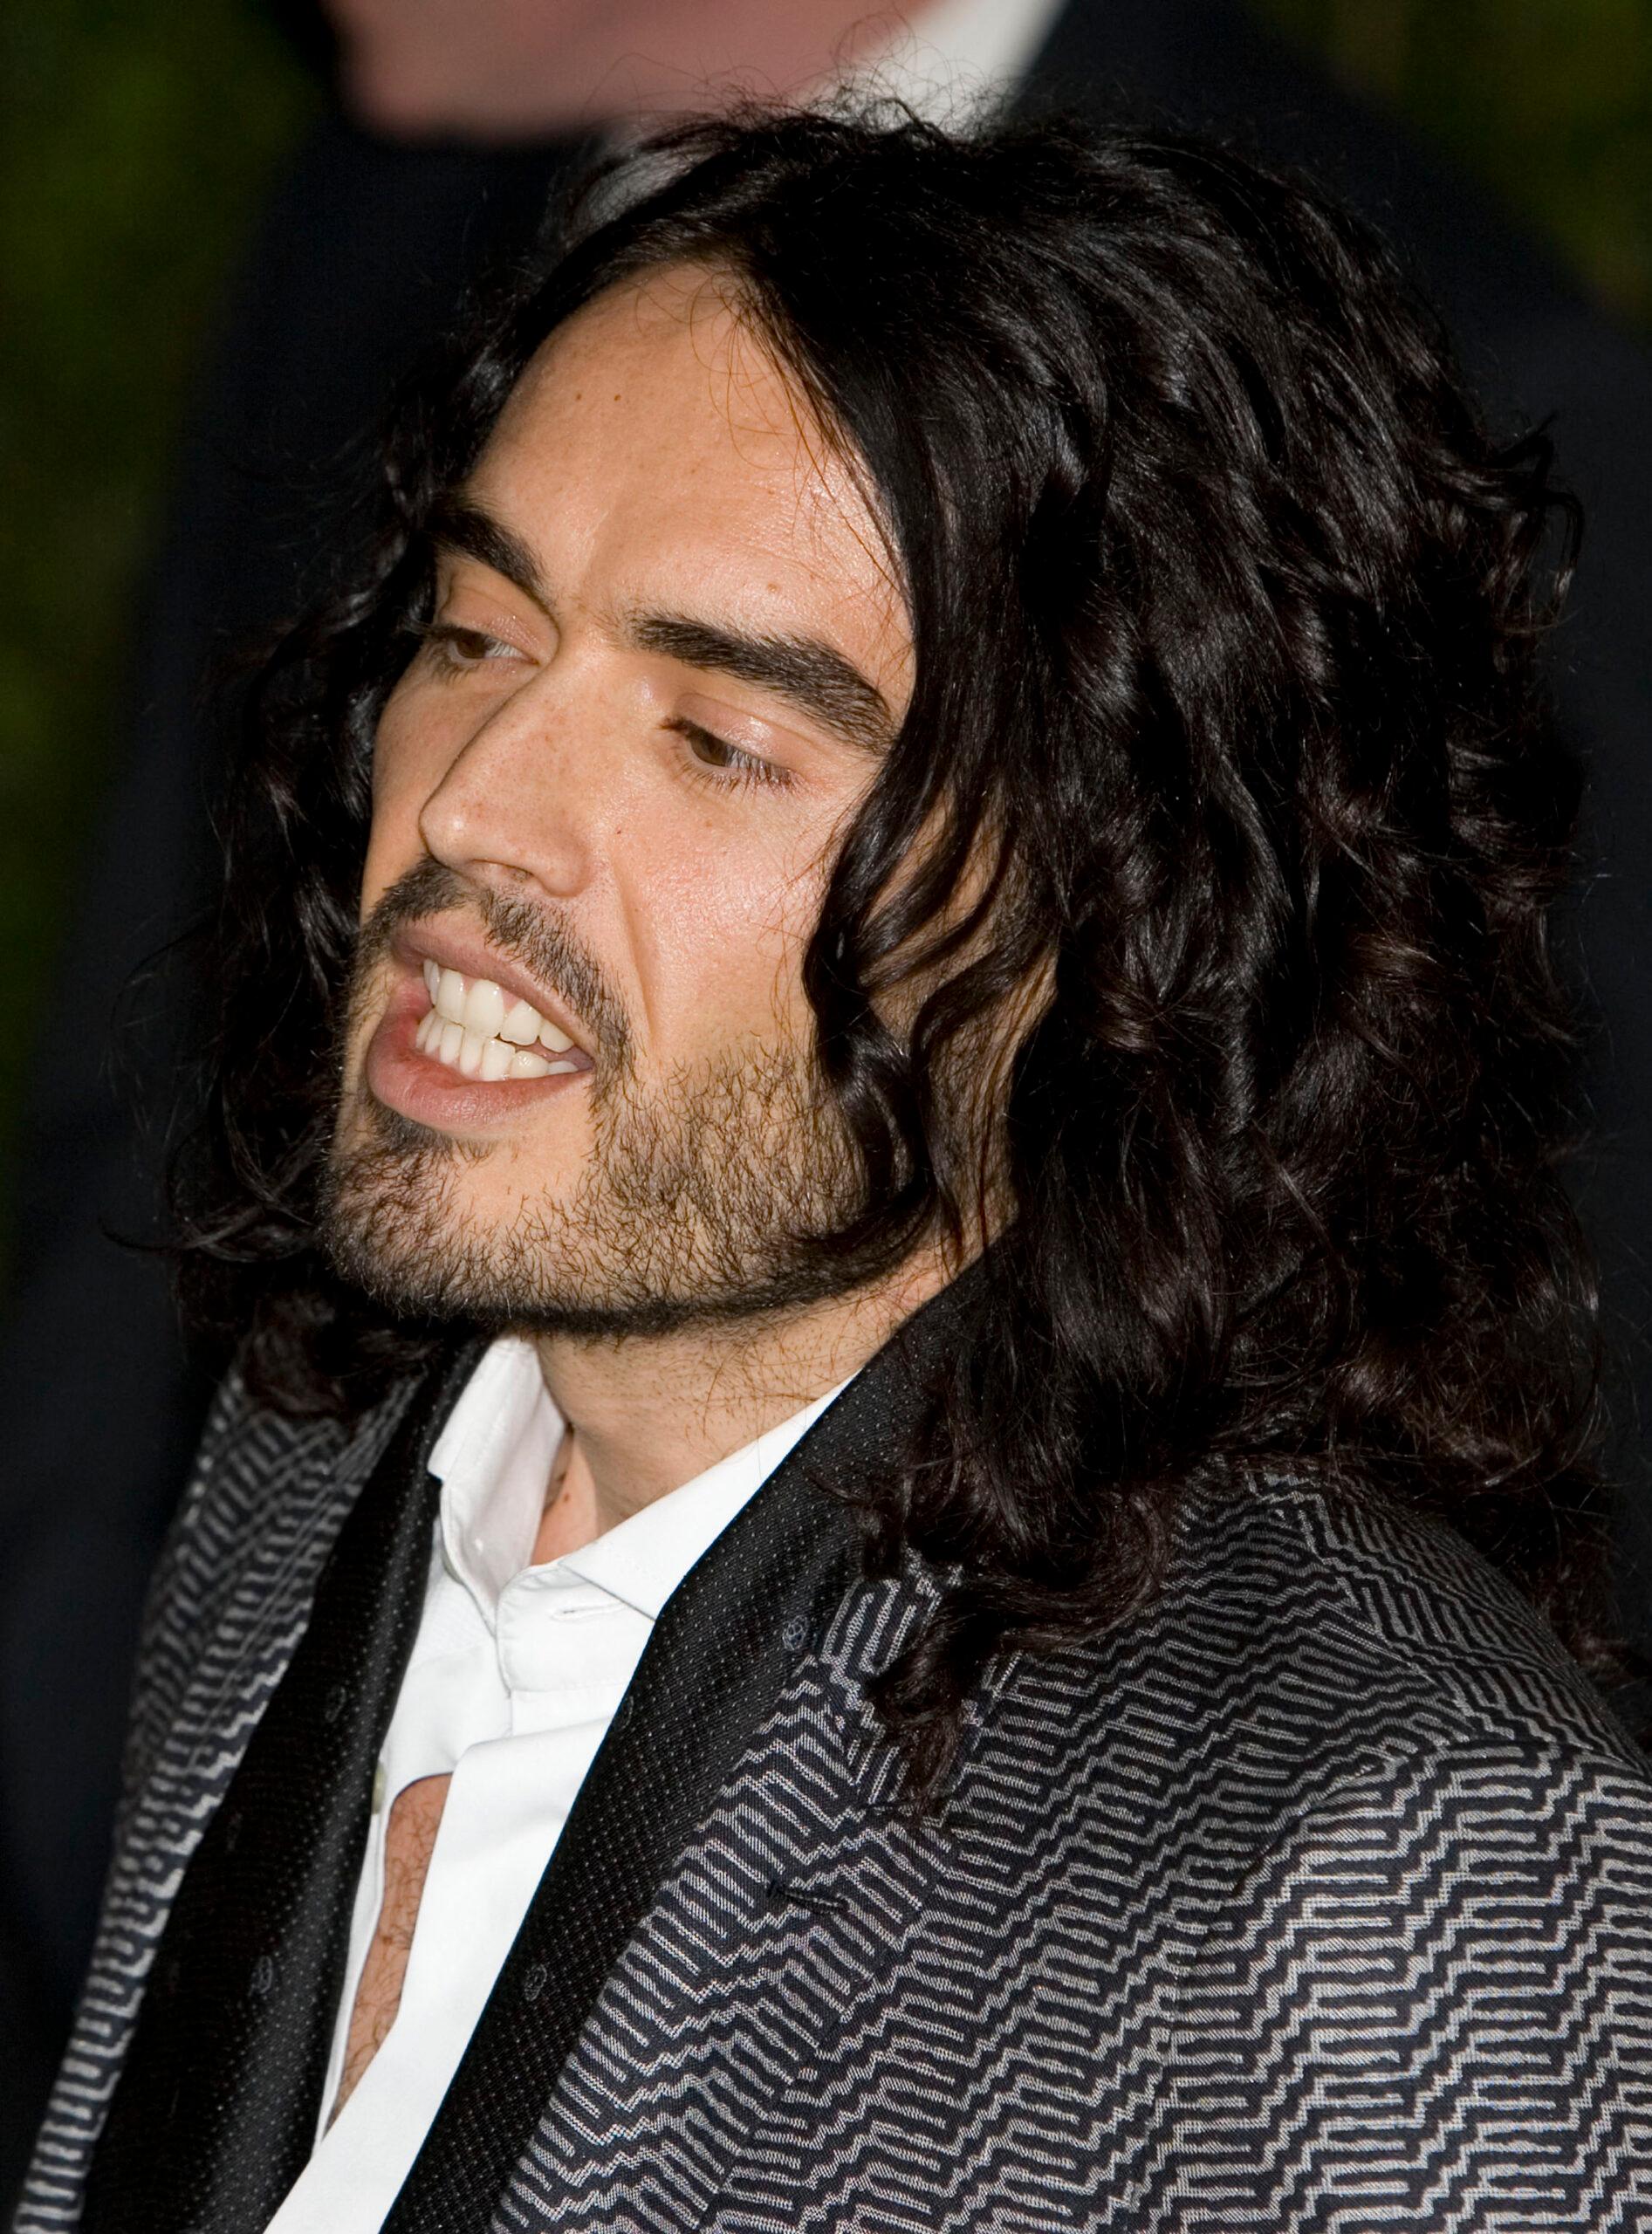 Russell Brand On Getting Baptized: ‘I Feel As Though Some New Resource Within Me Has Switched On’